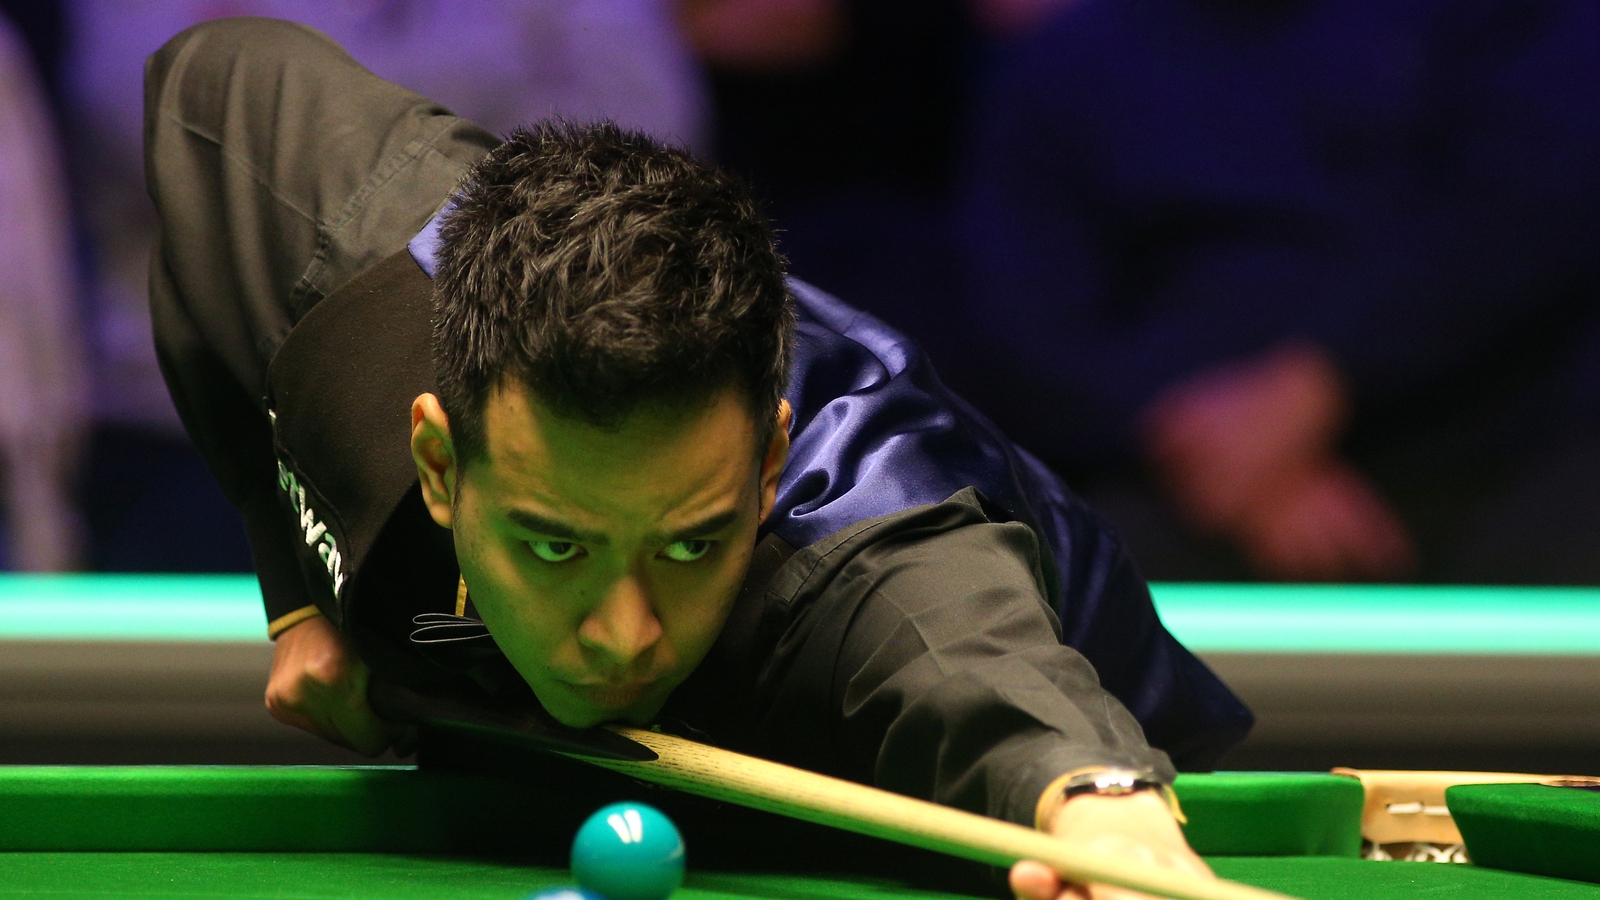 Saengkham upsets Higgins to advance in Champions League